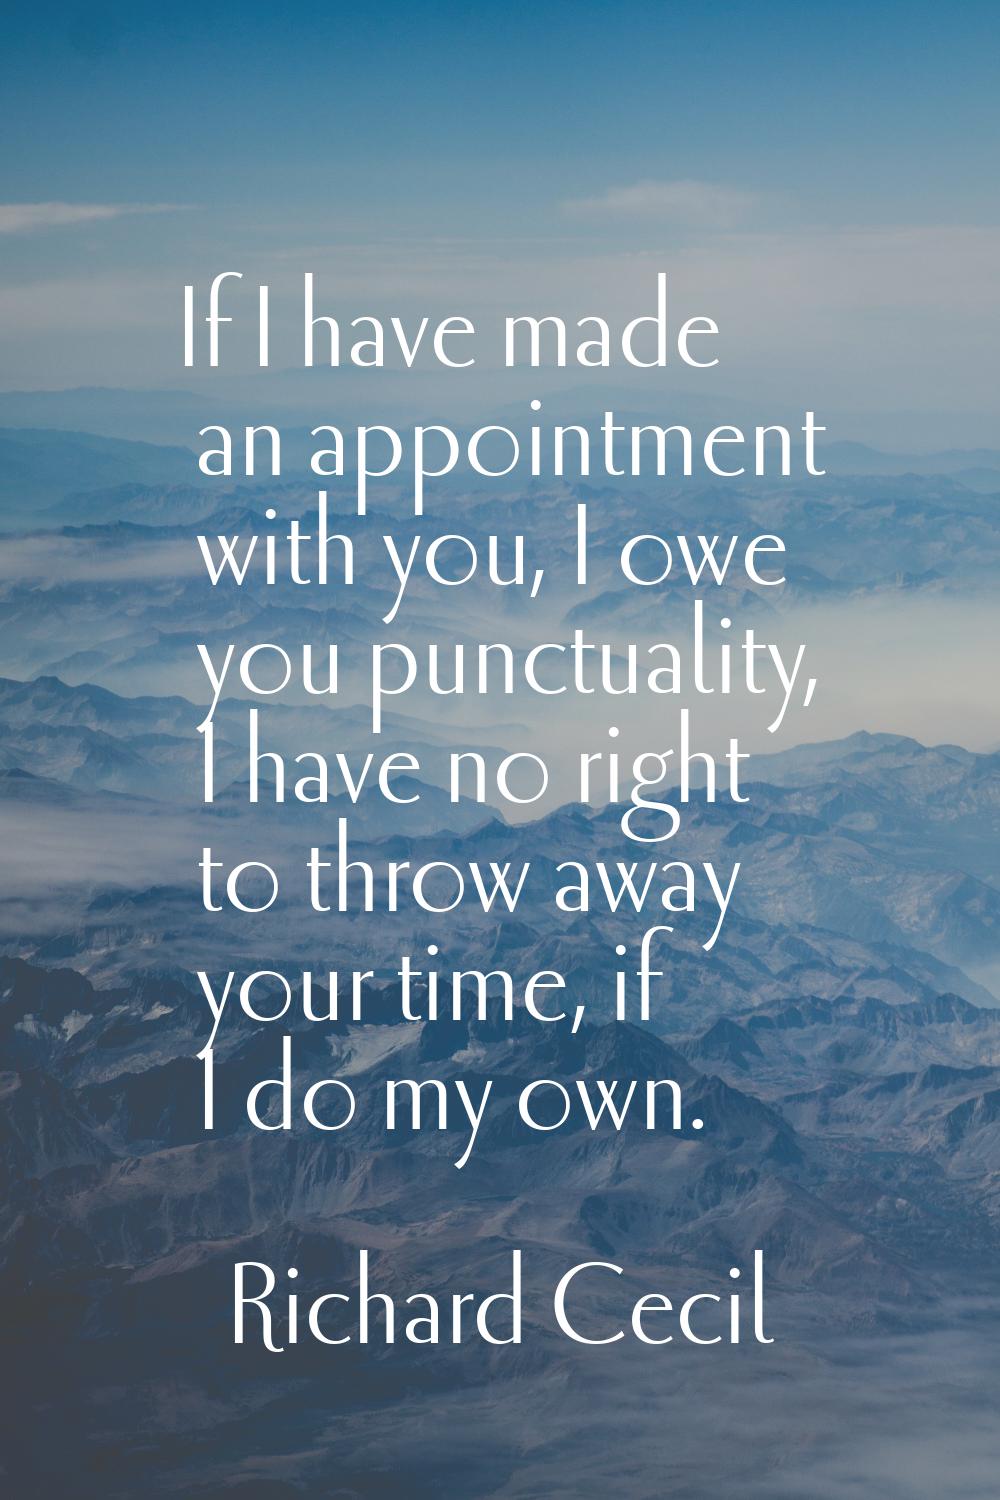 If I have made an appointment with you, I owe you punctuality, I have no right to throw away your t